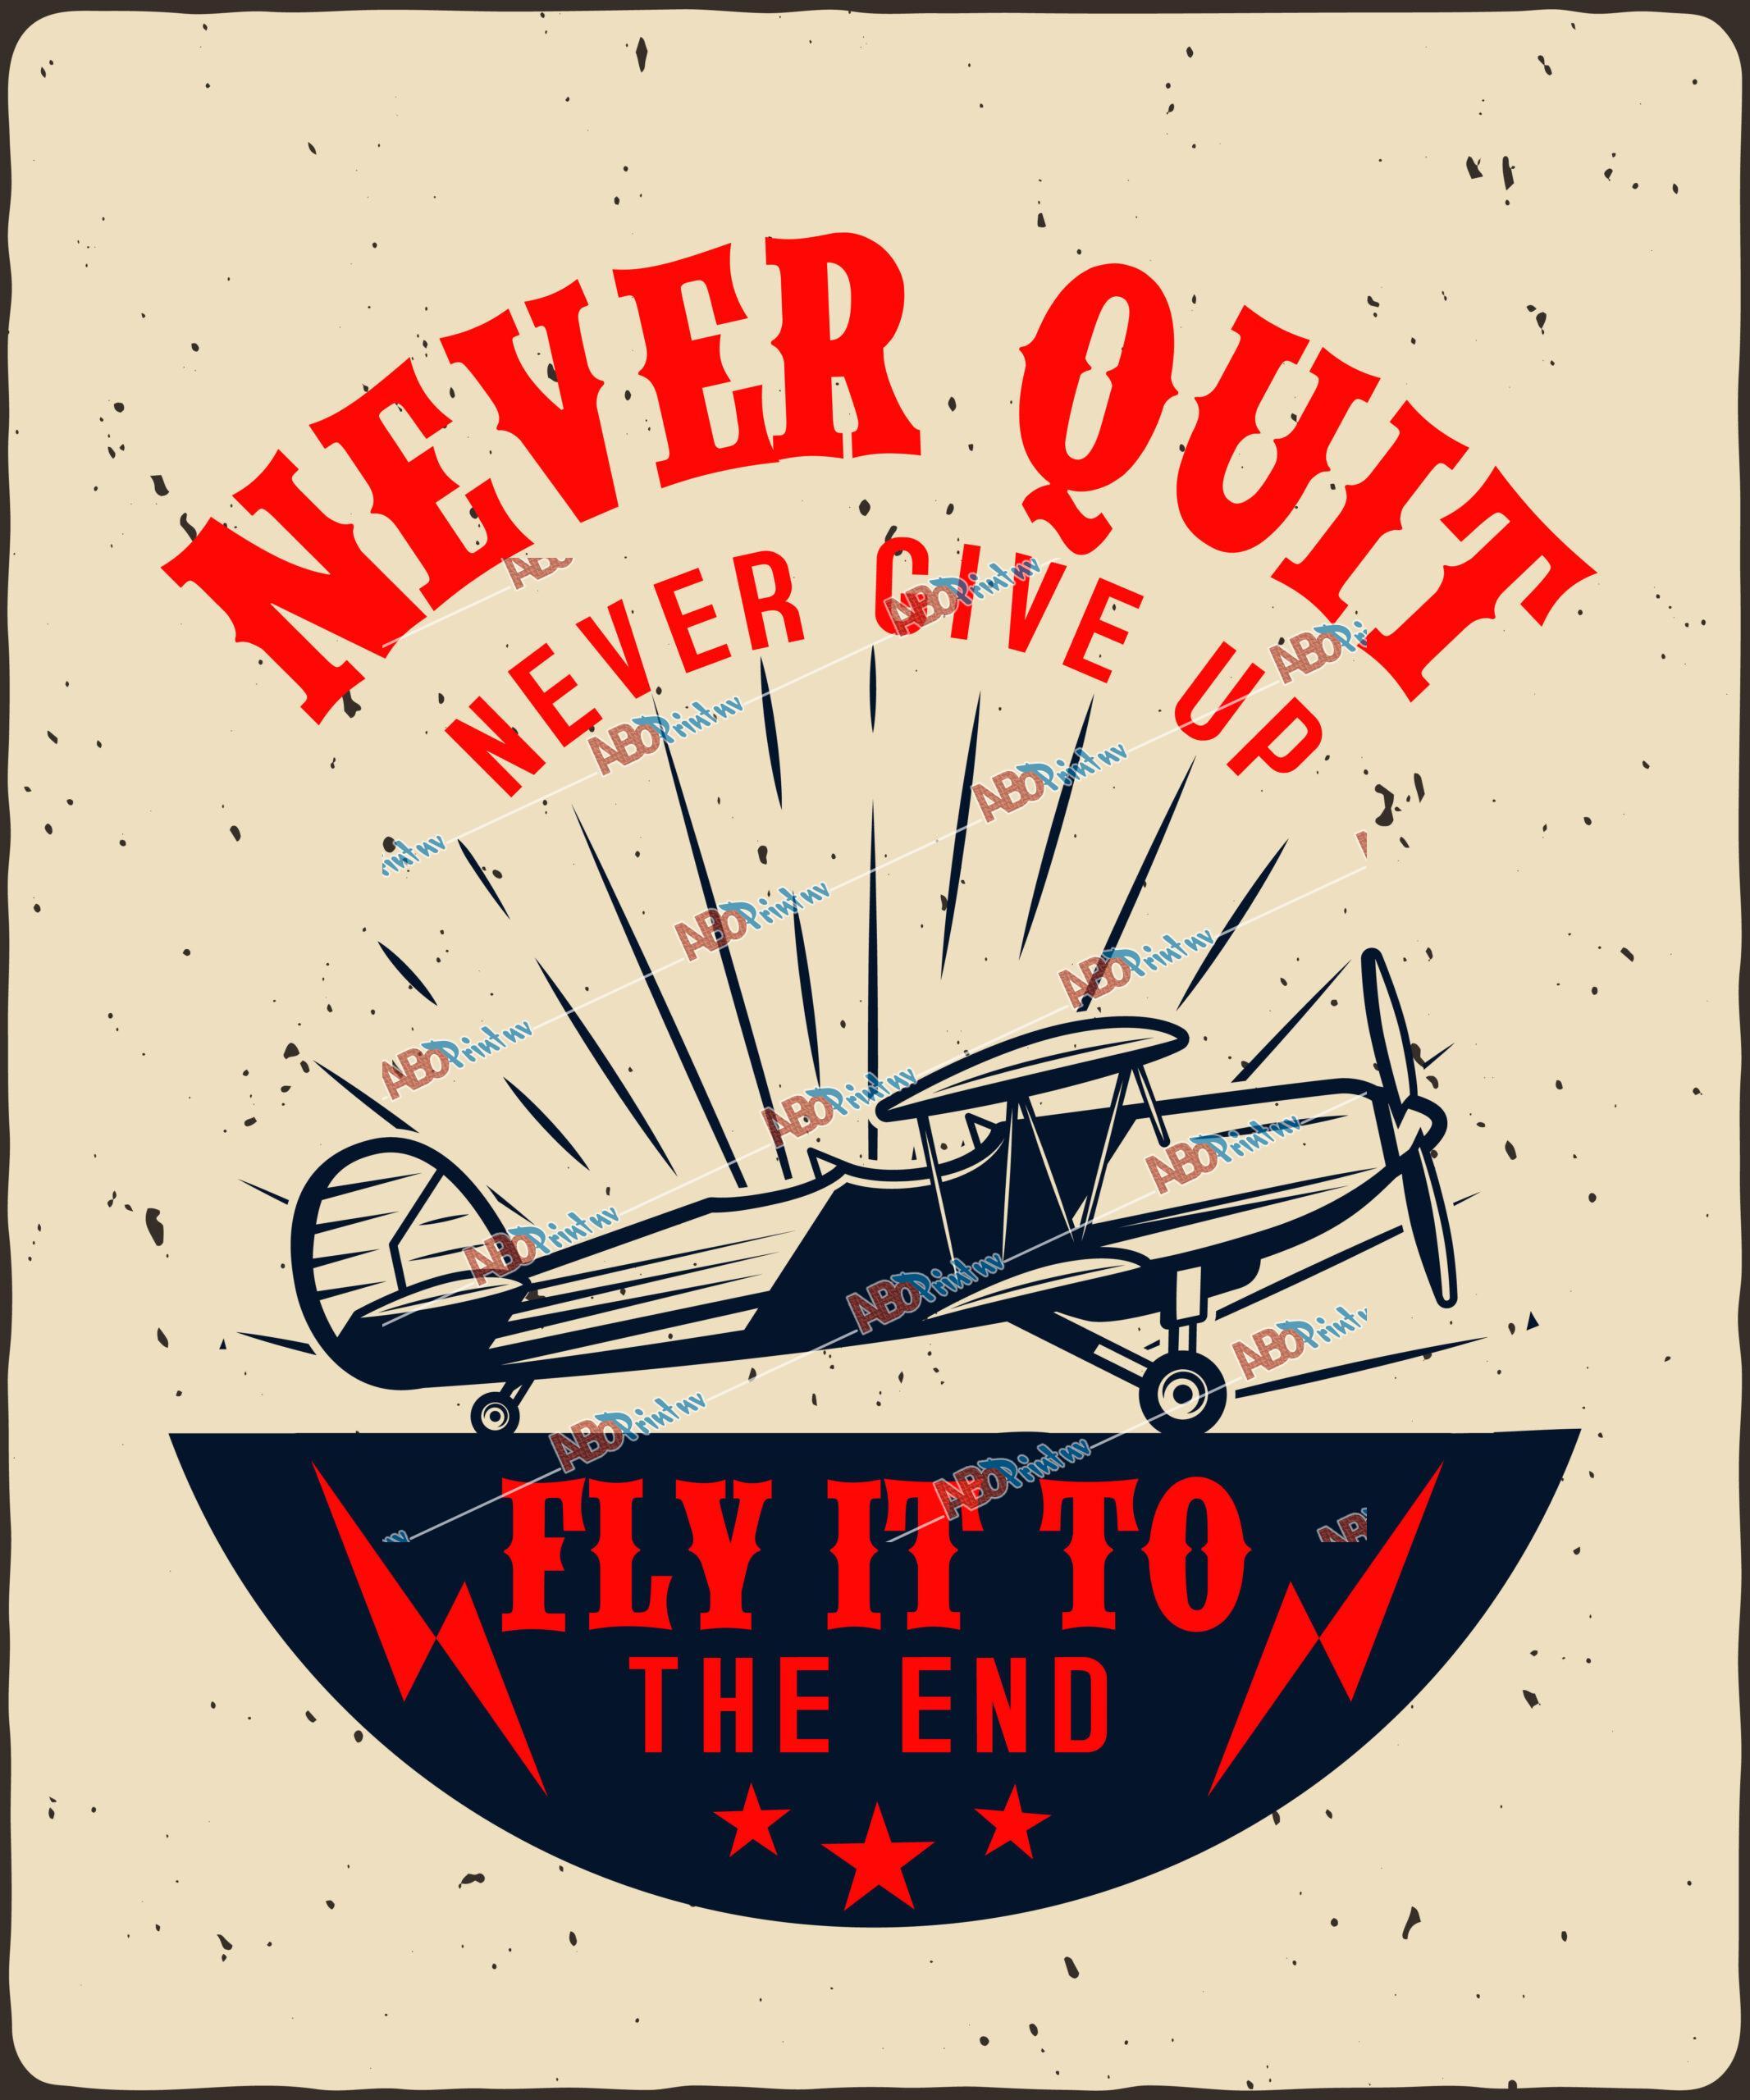 Never quit. Never give up. Fly it to the end.